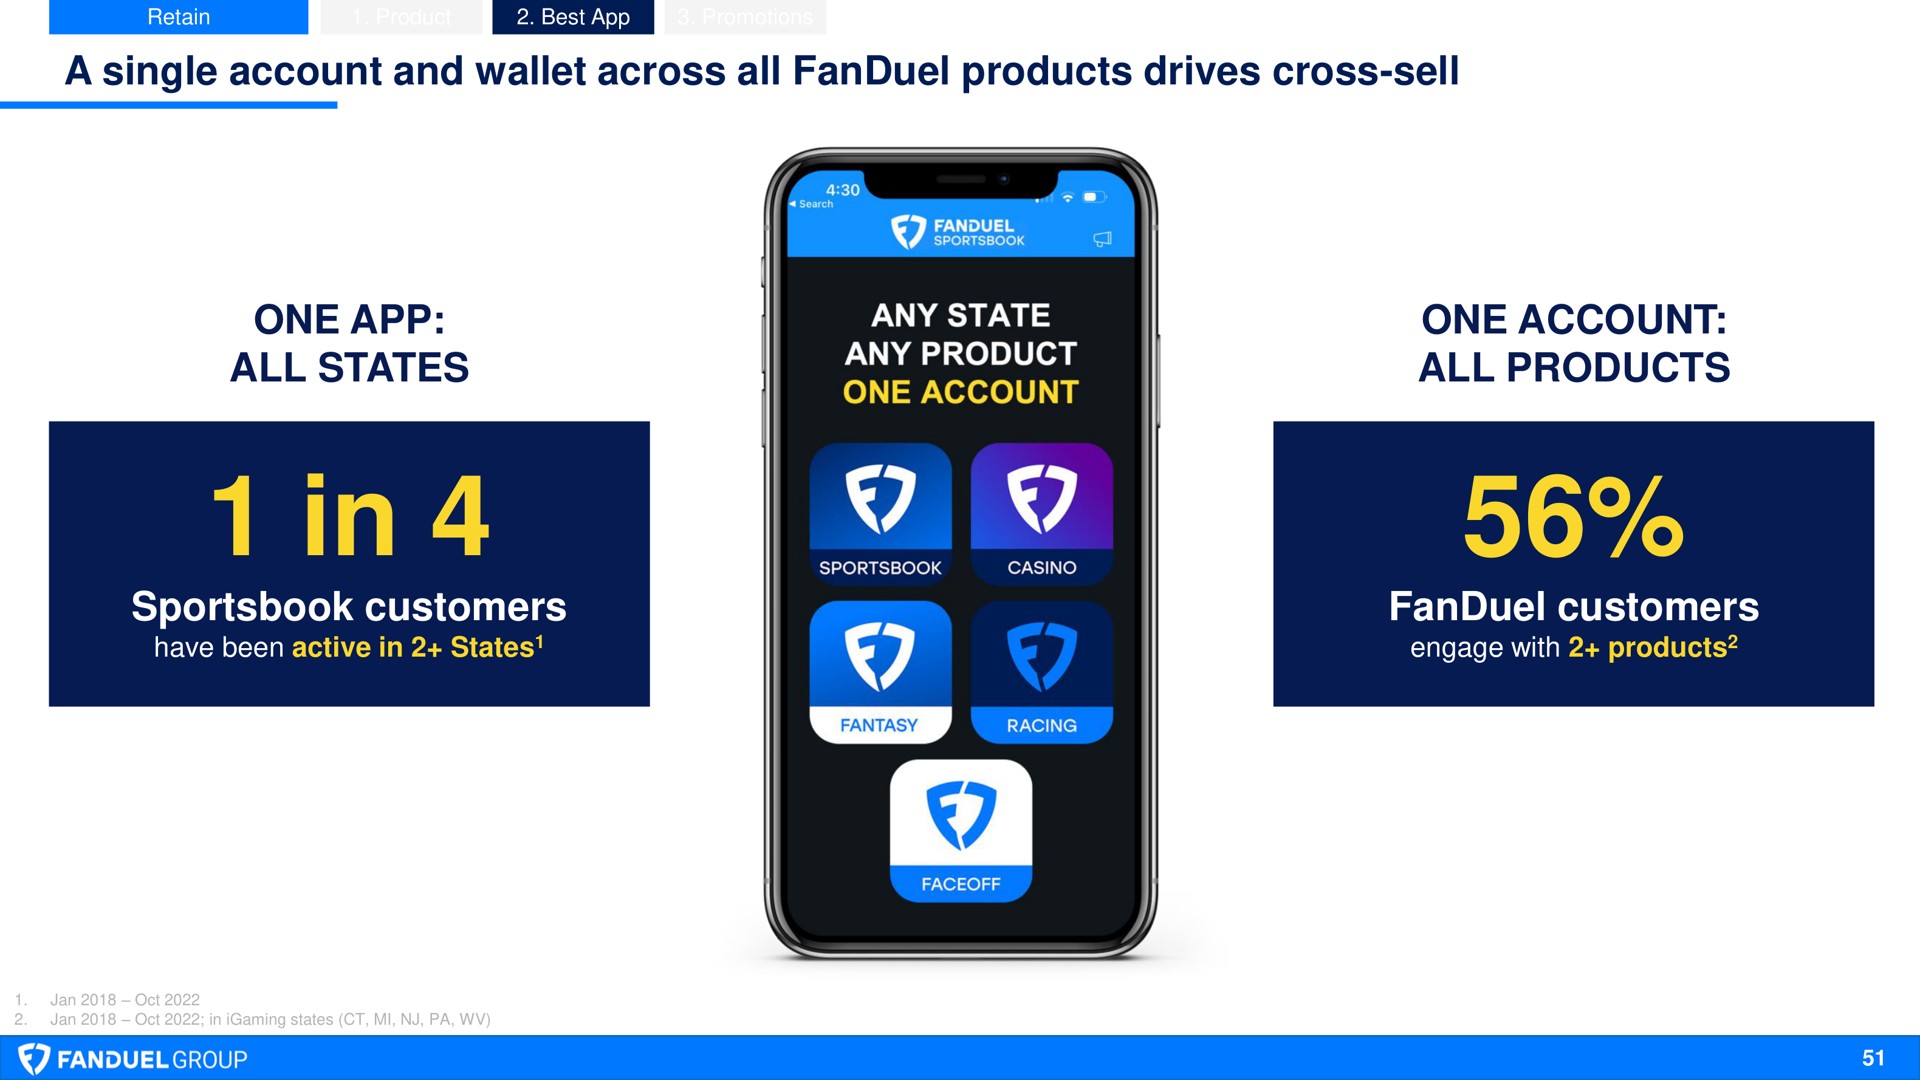 a single account and wallet across all products drives cross sell one all states in customers one account all products customers any product bree by | Flutter